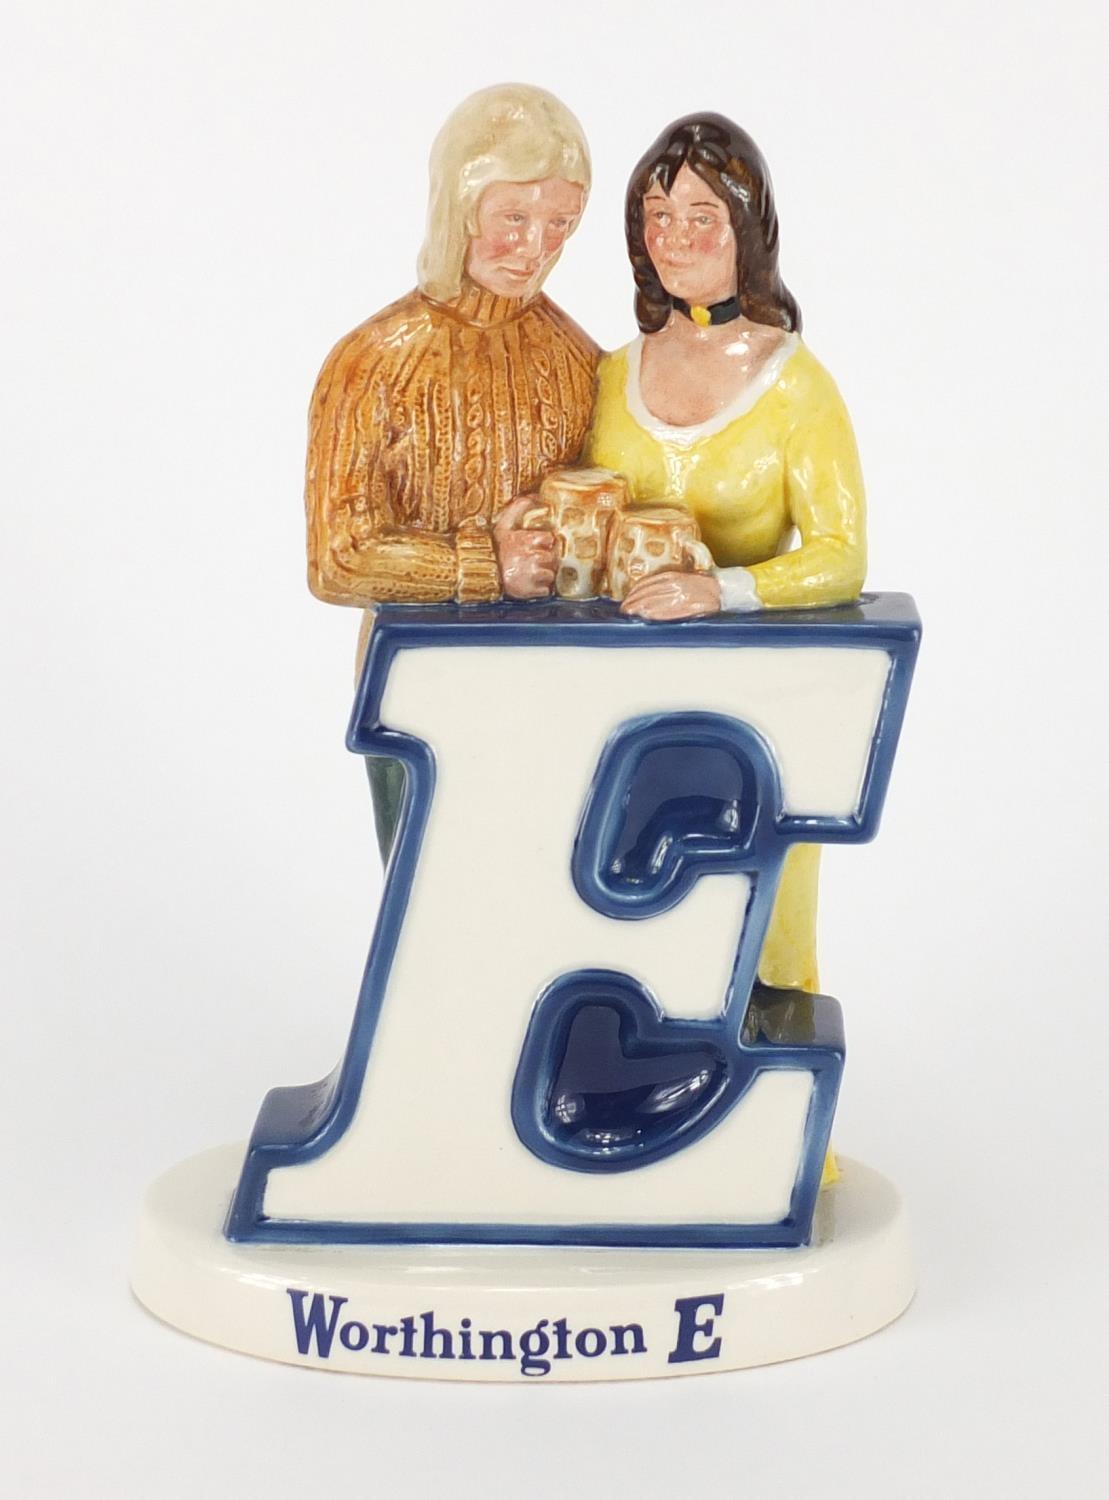 Beswick Worthington E figure group of a man and woman with beer, 23cm high : For further Condition